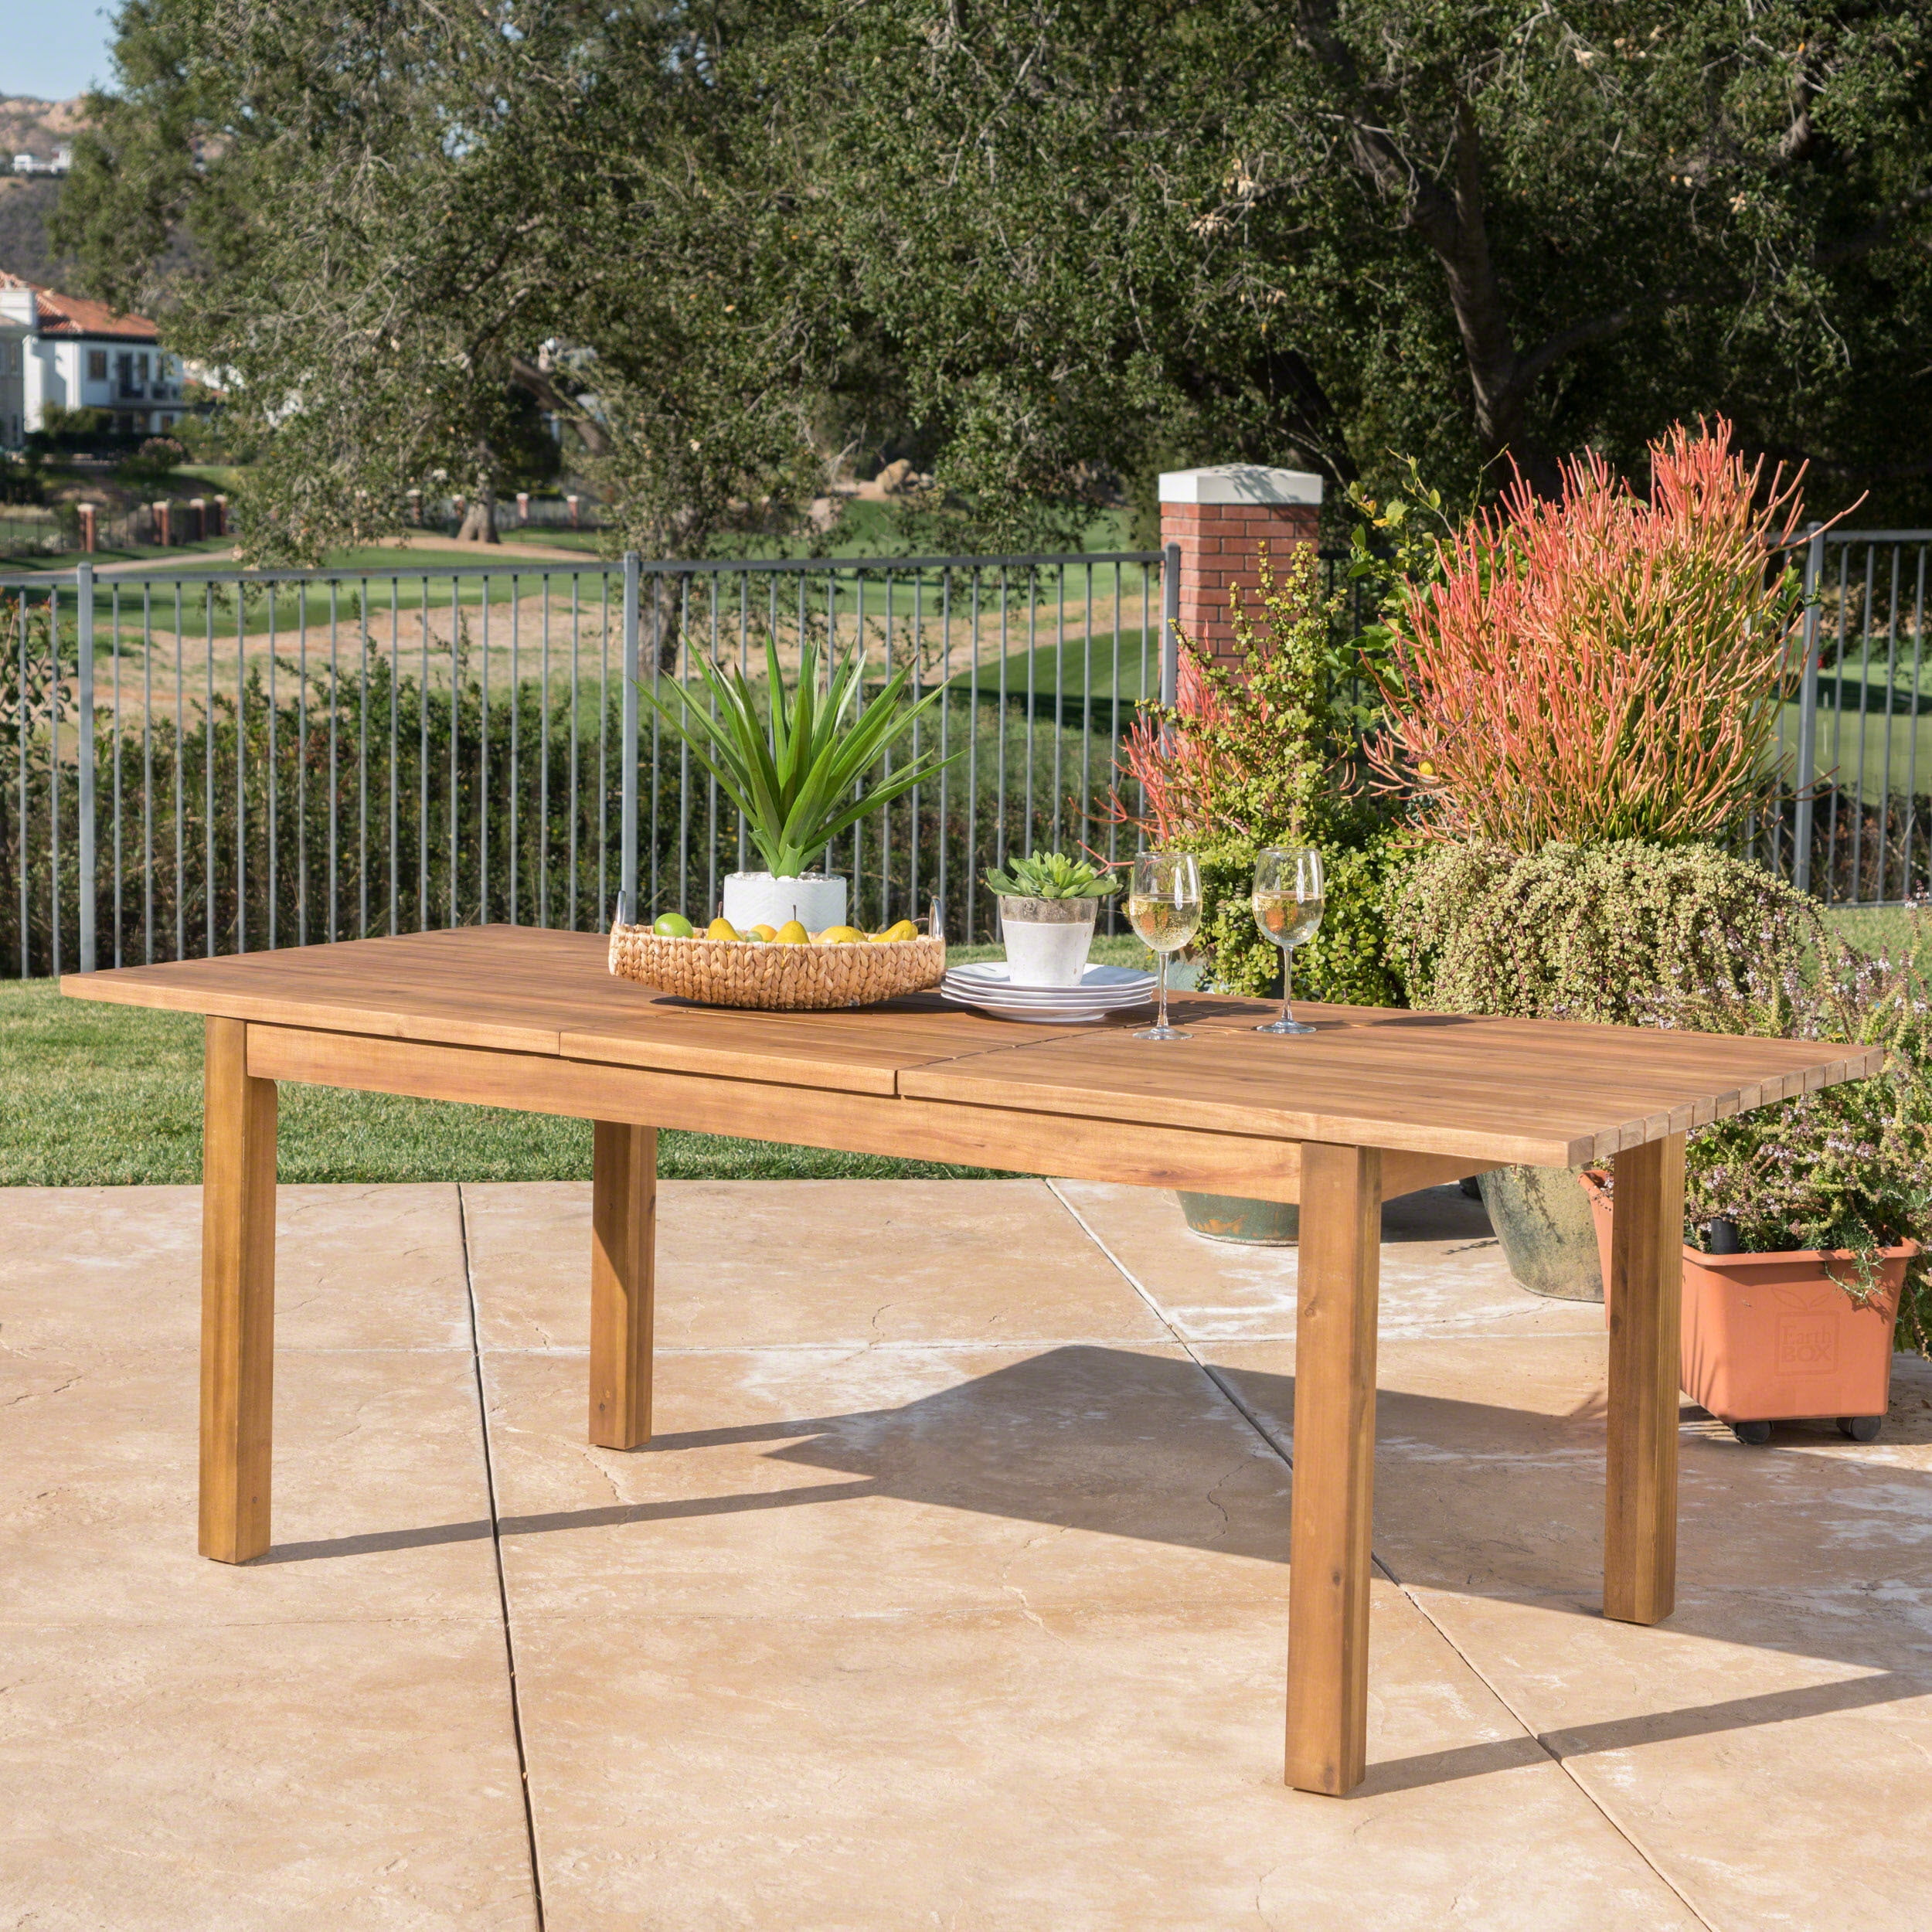 Stylish Design Teak Dining Table: Make A Statement In Your Dining Room